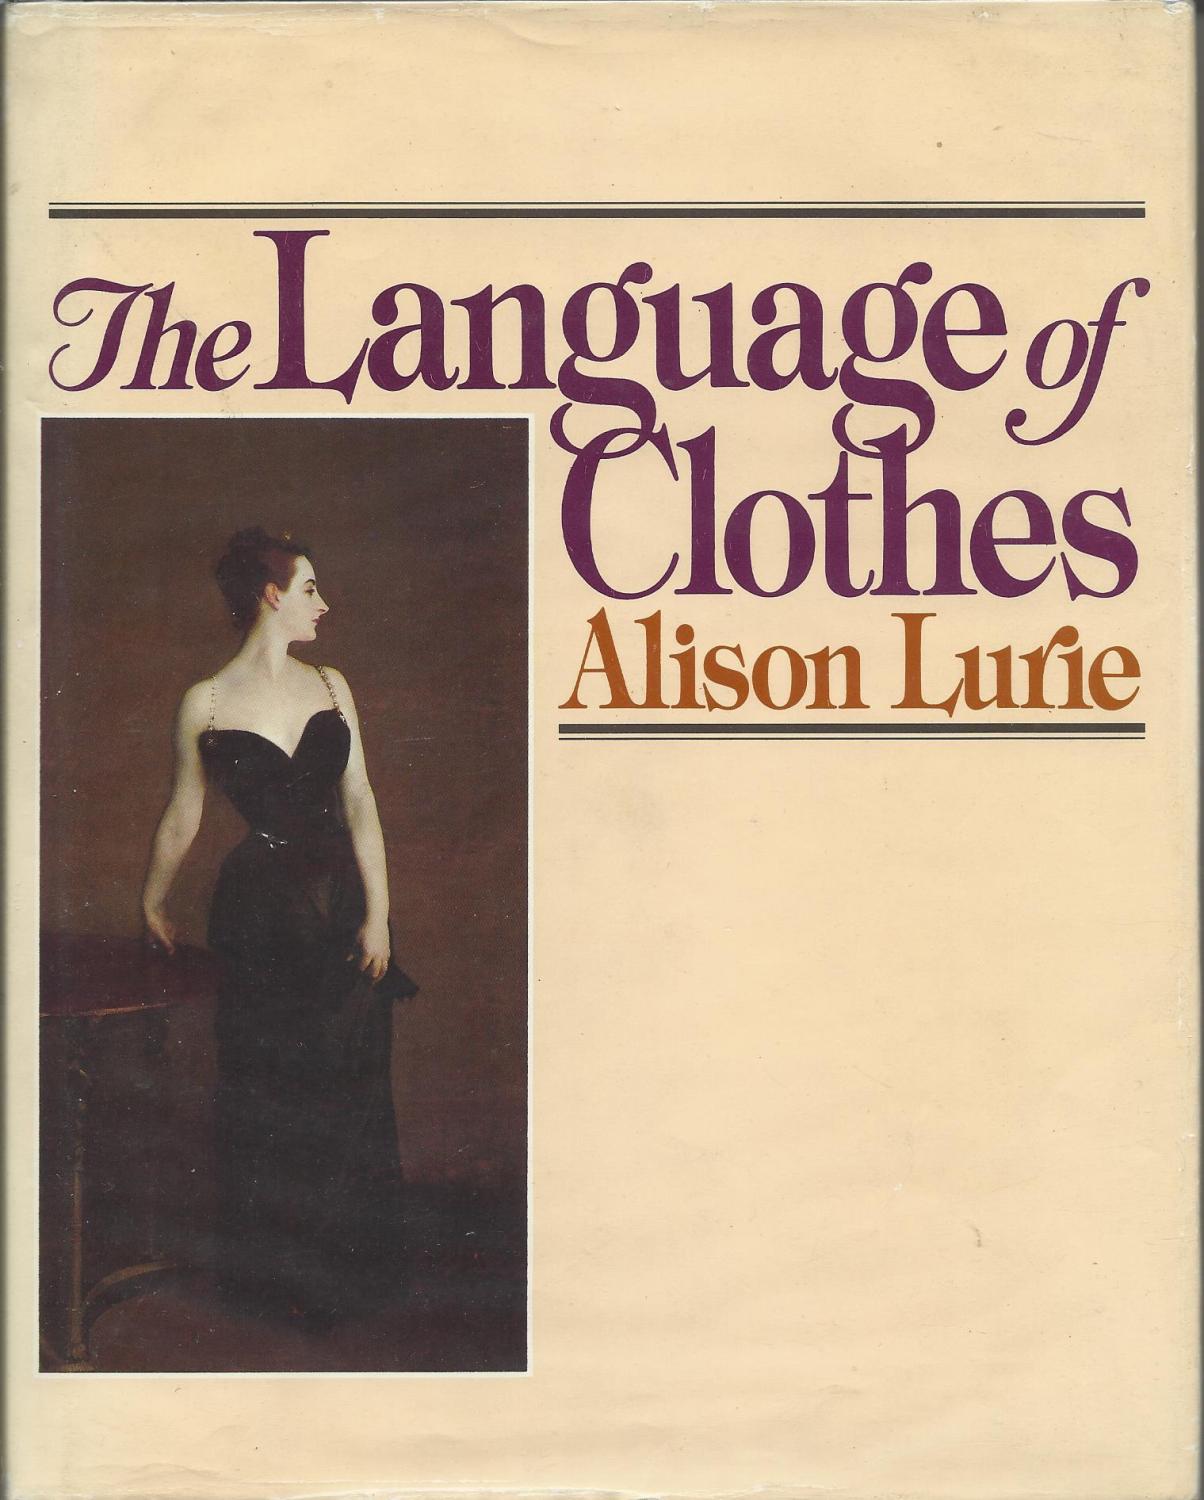 Language of Clothes, The